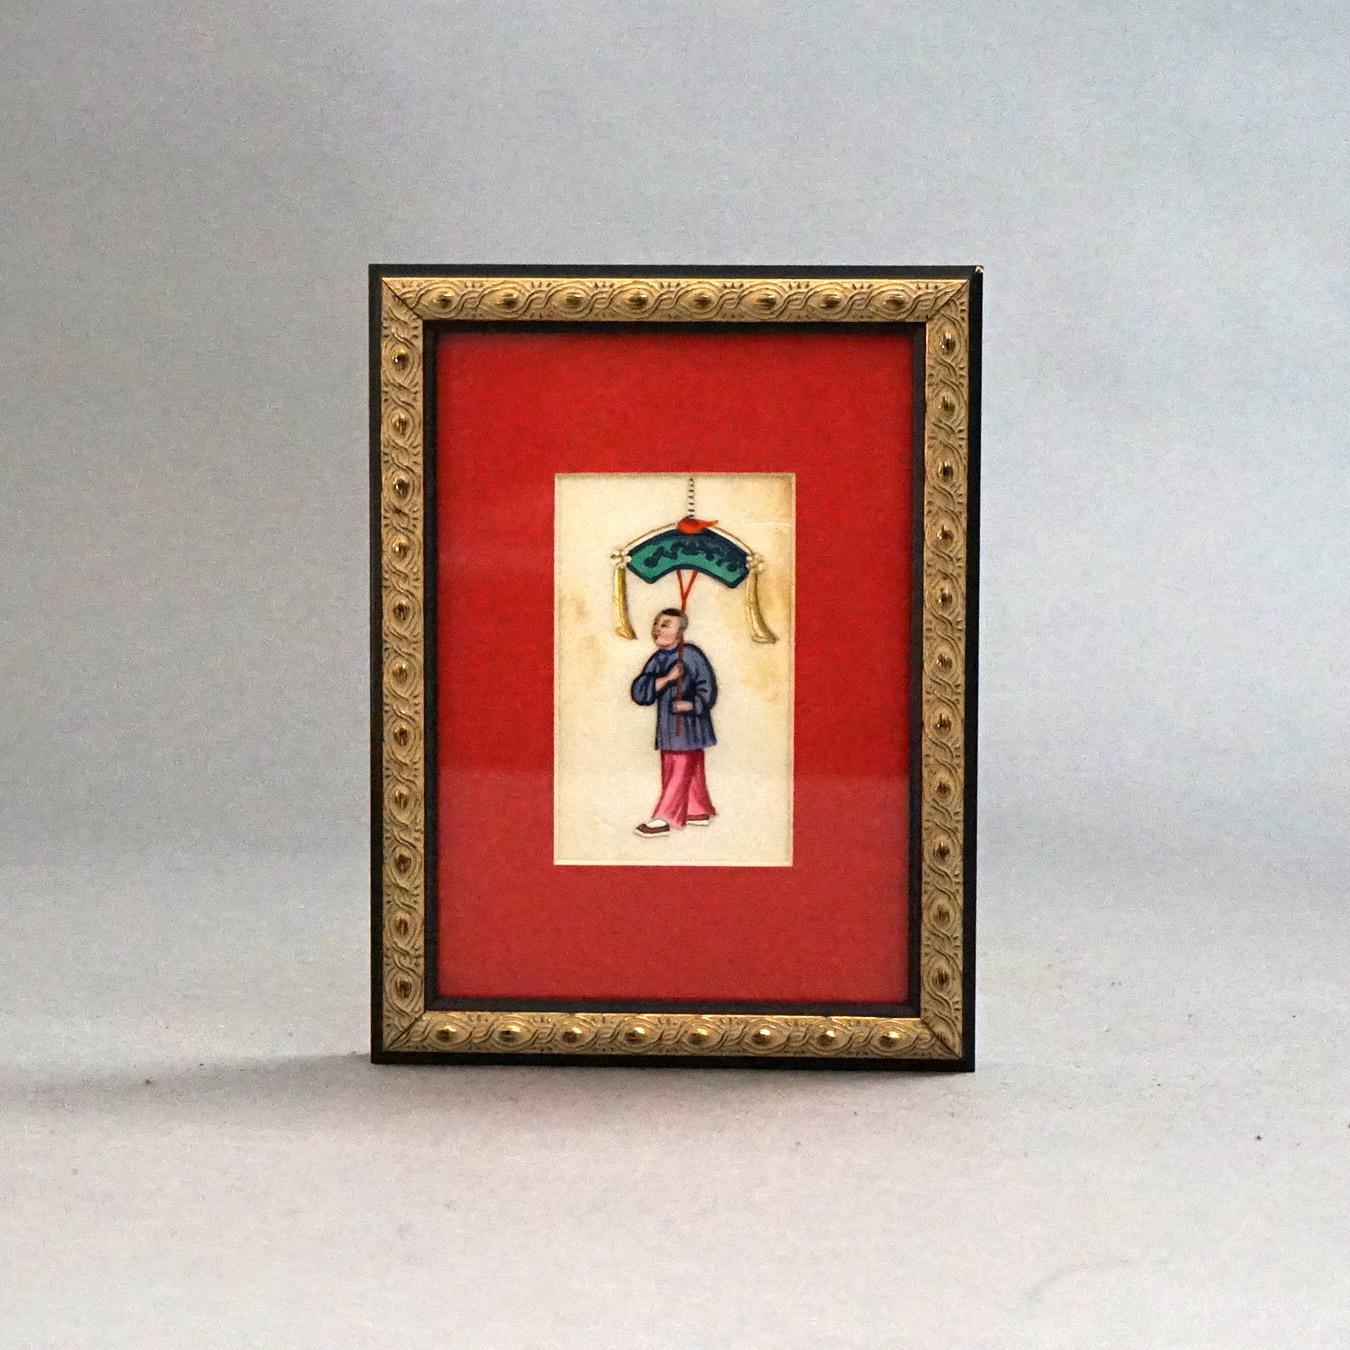 Seven Chinese Miniature Figural Paintings on Silk, Framed, 20thC

Measures- Boars: 8''H x 6''W x 1''D; All Others: 8''H x 6''W x 1''D